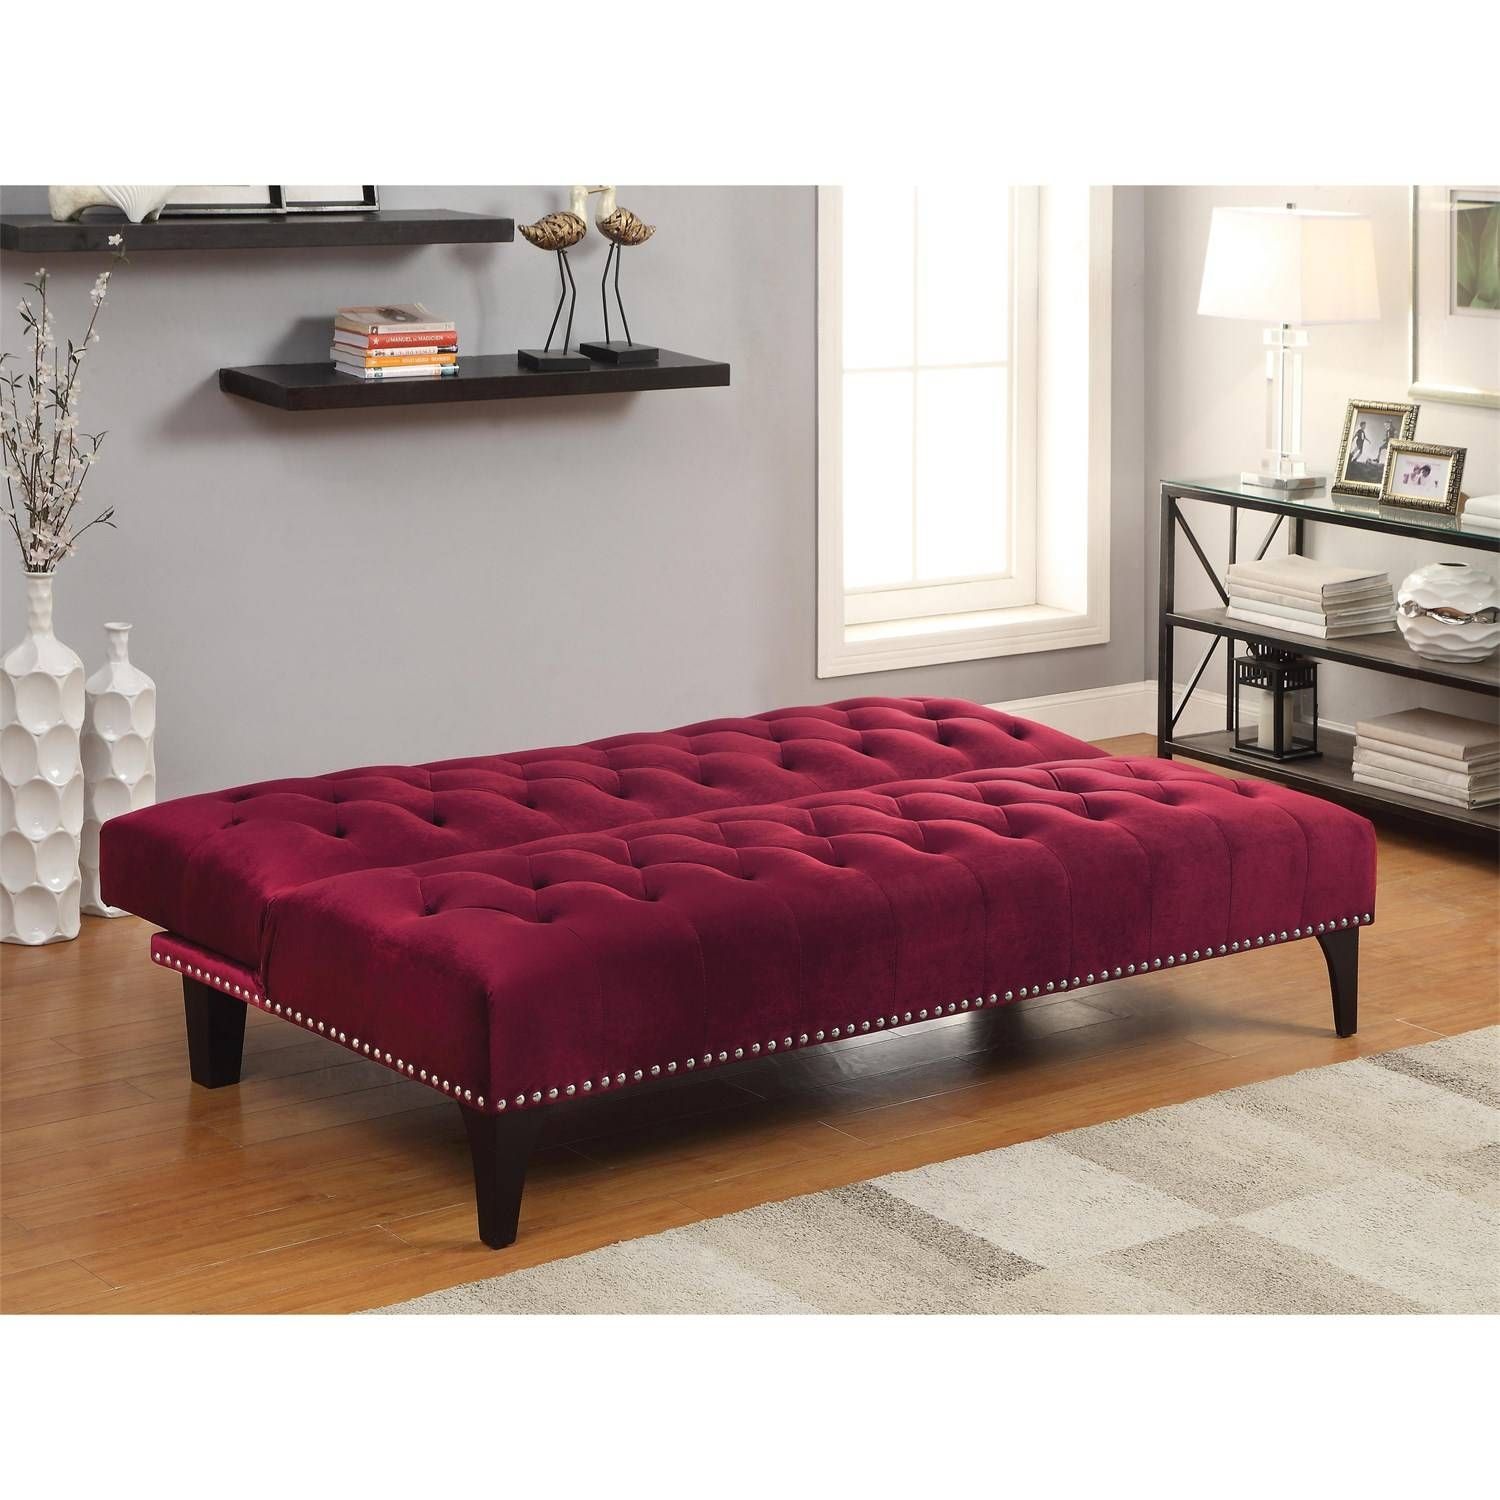 Velvet Sofa Bed – Gallery Image Seniorhomes Intended For Chintz Sofa Beds (View 11 of 30)